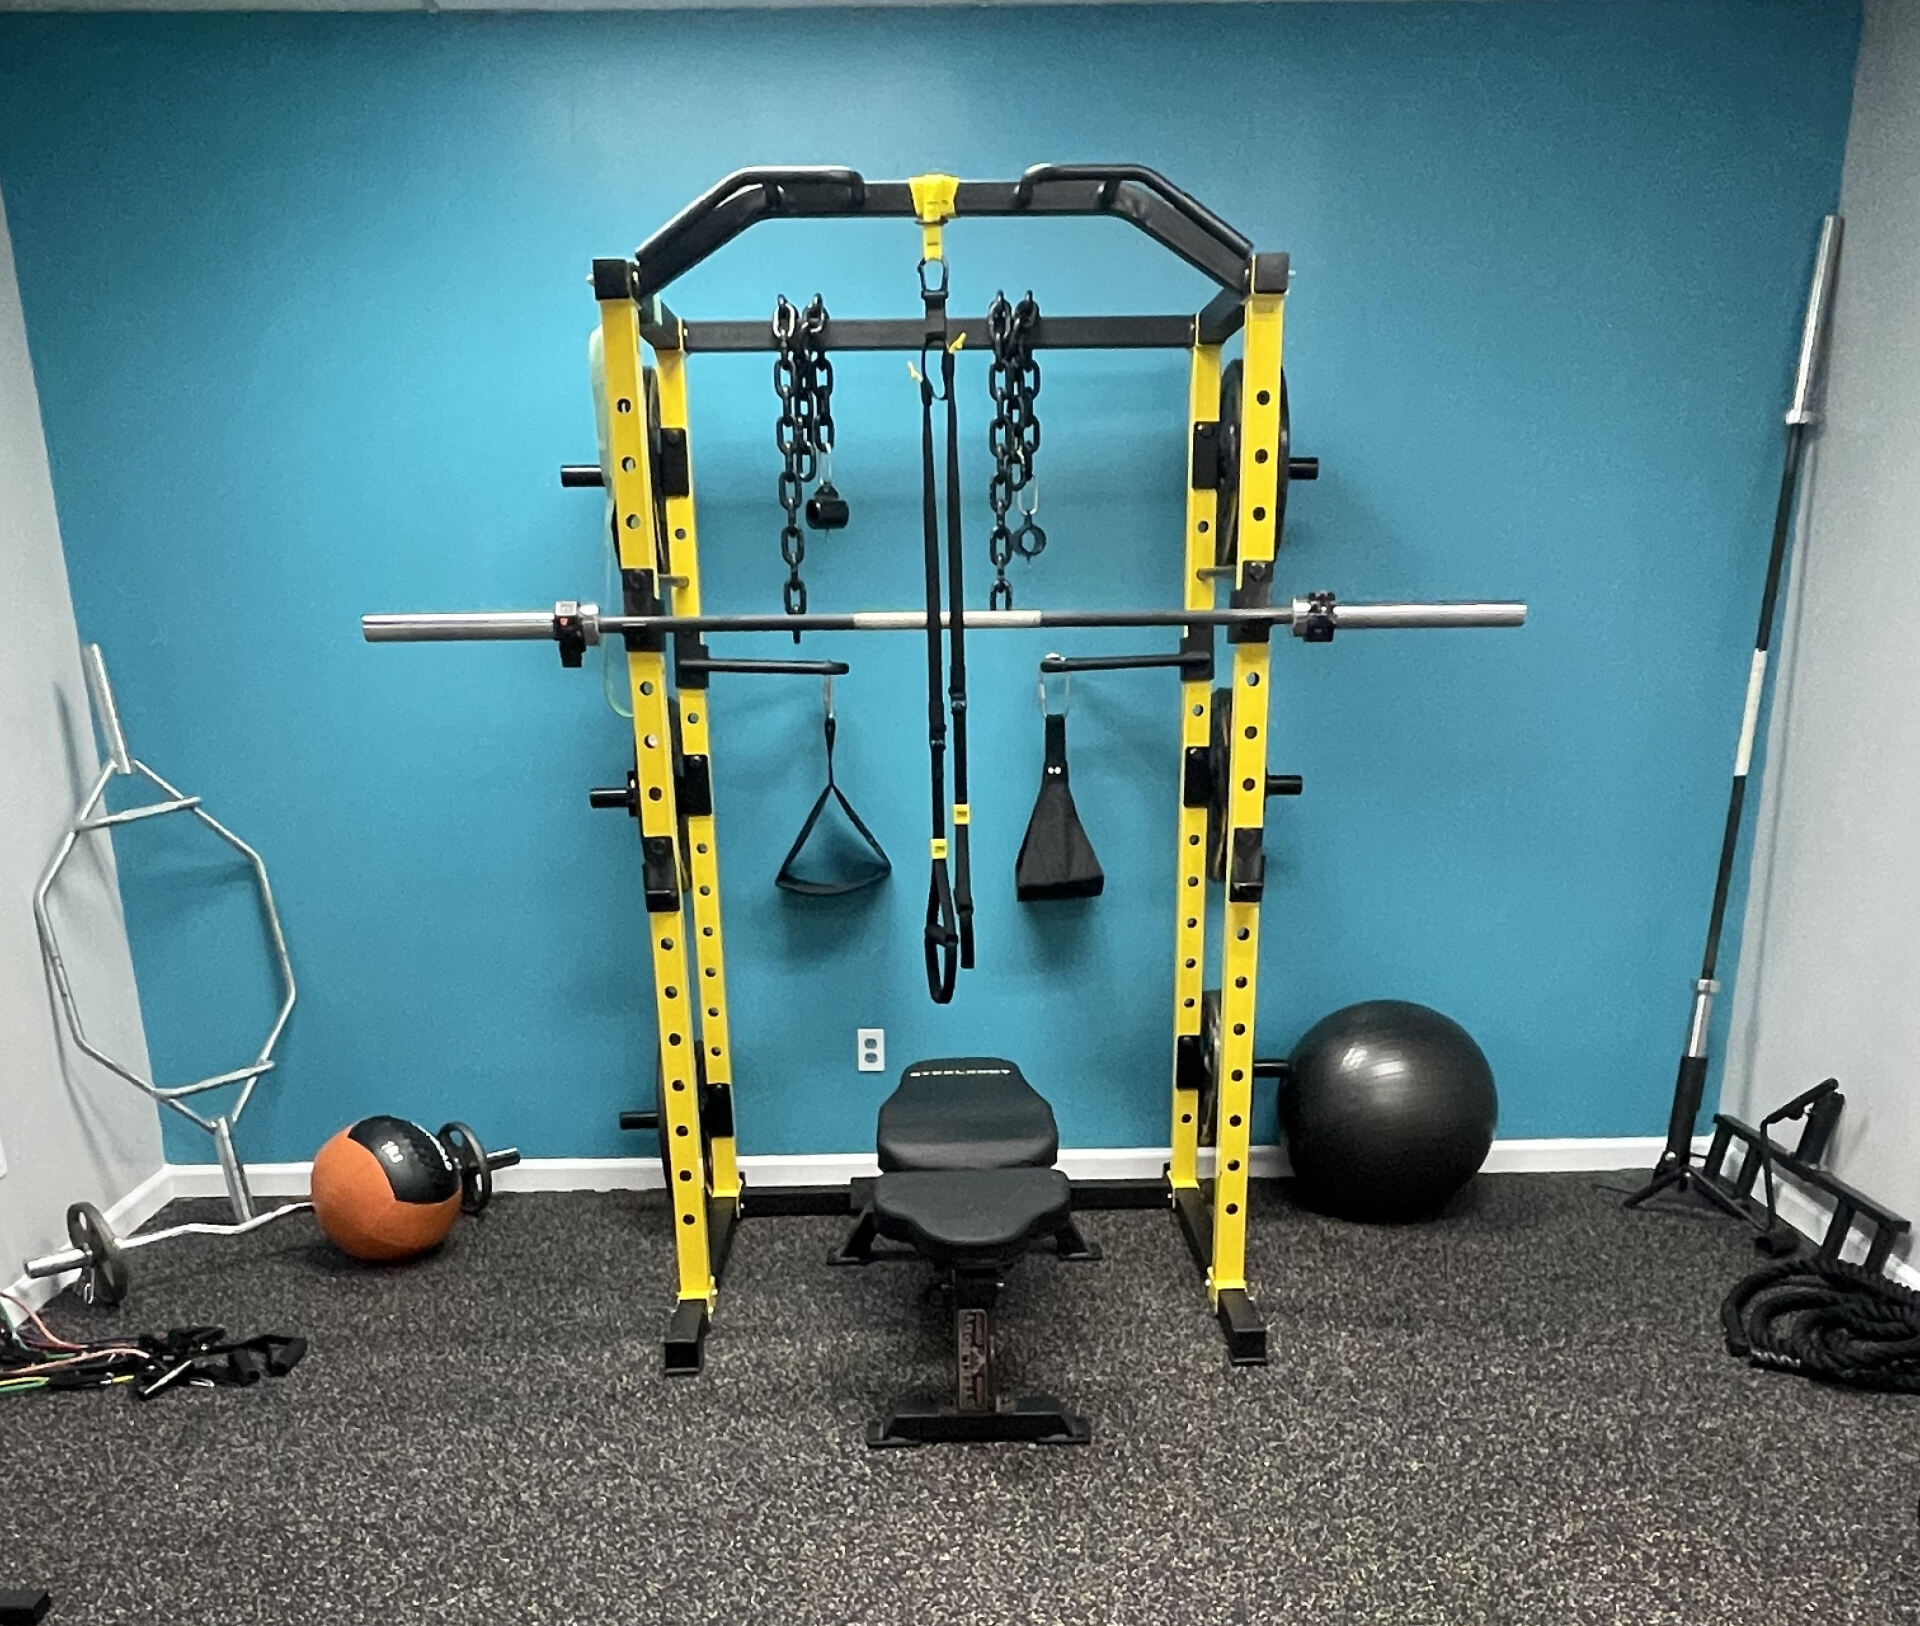 personal training gym at their facility